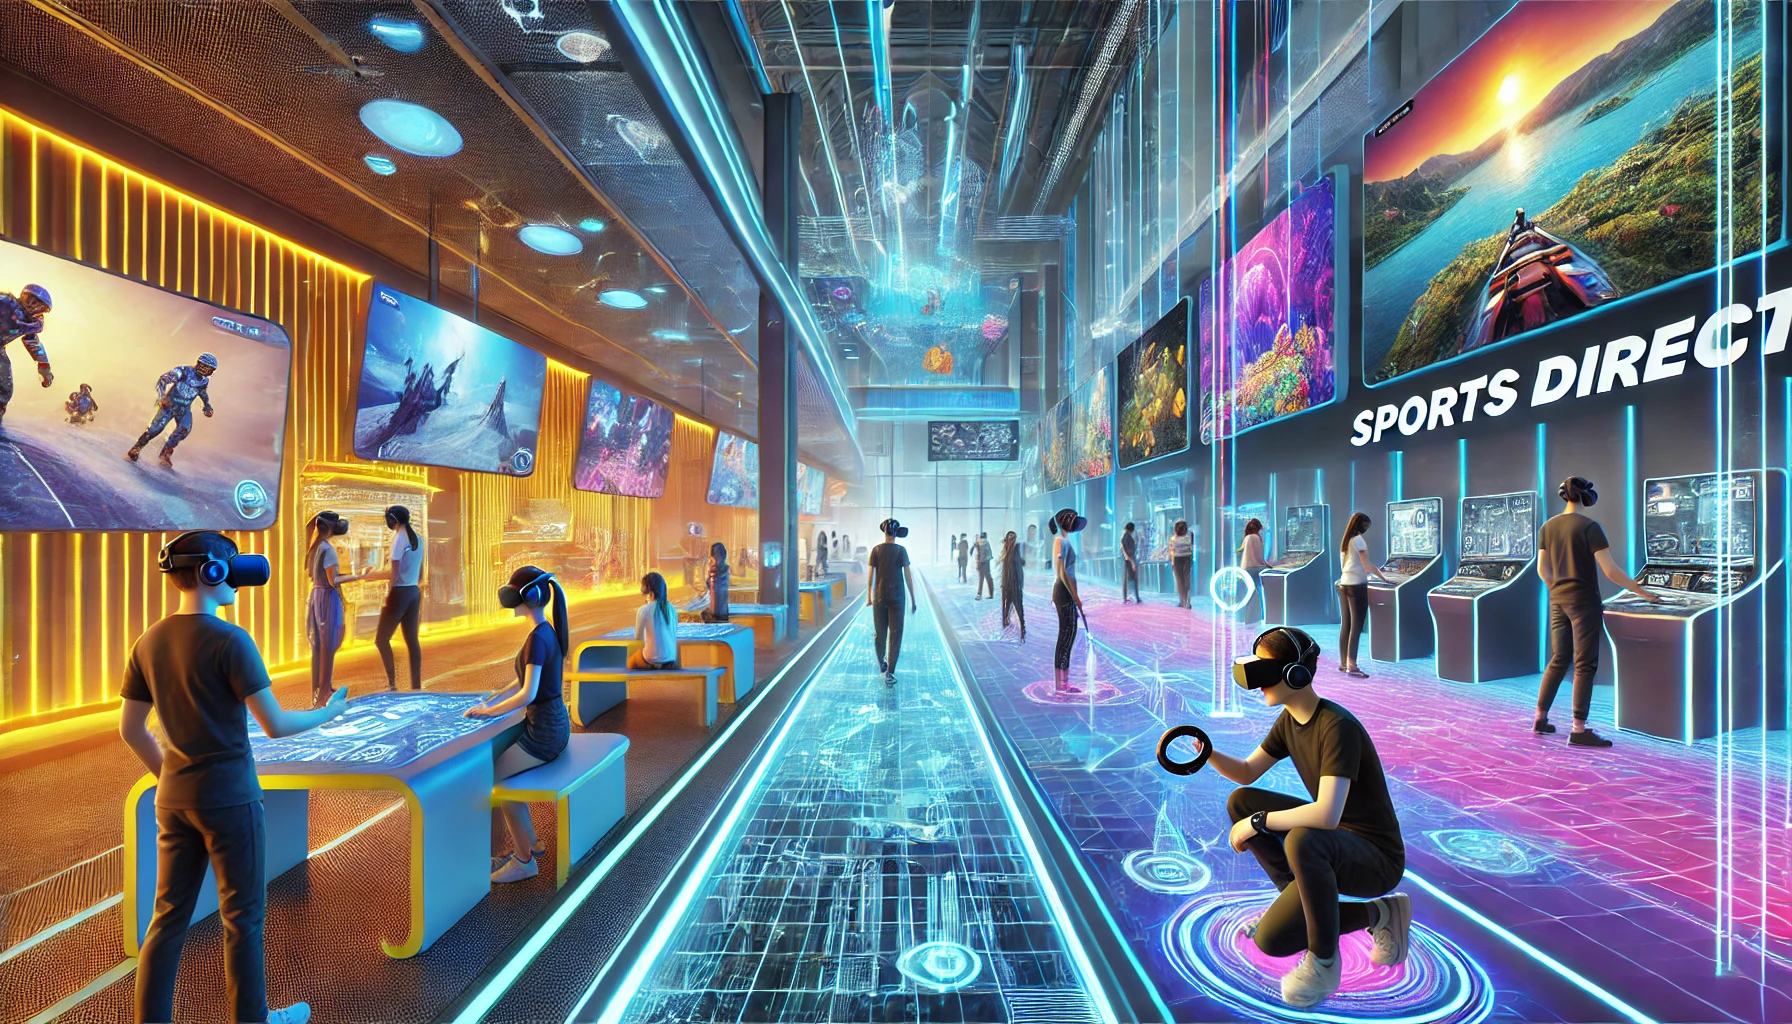 Futuristic entertainment zones: VR area with people using headsets, interactive hallway with holographic displays, and a product display area with touchscreens and gesture-controlled games.